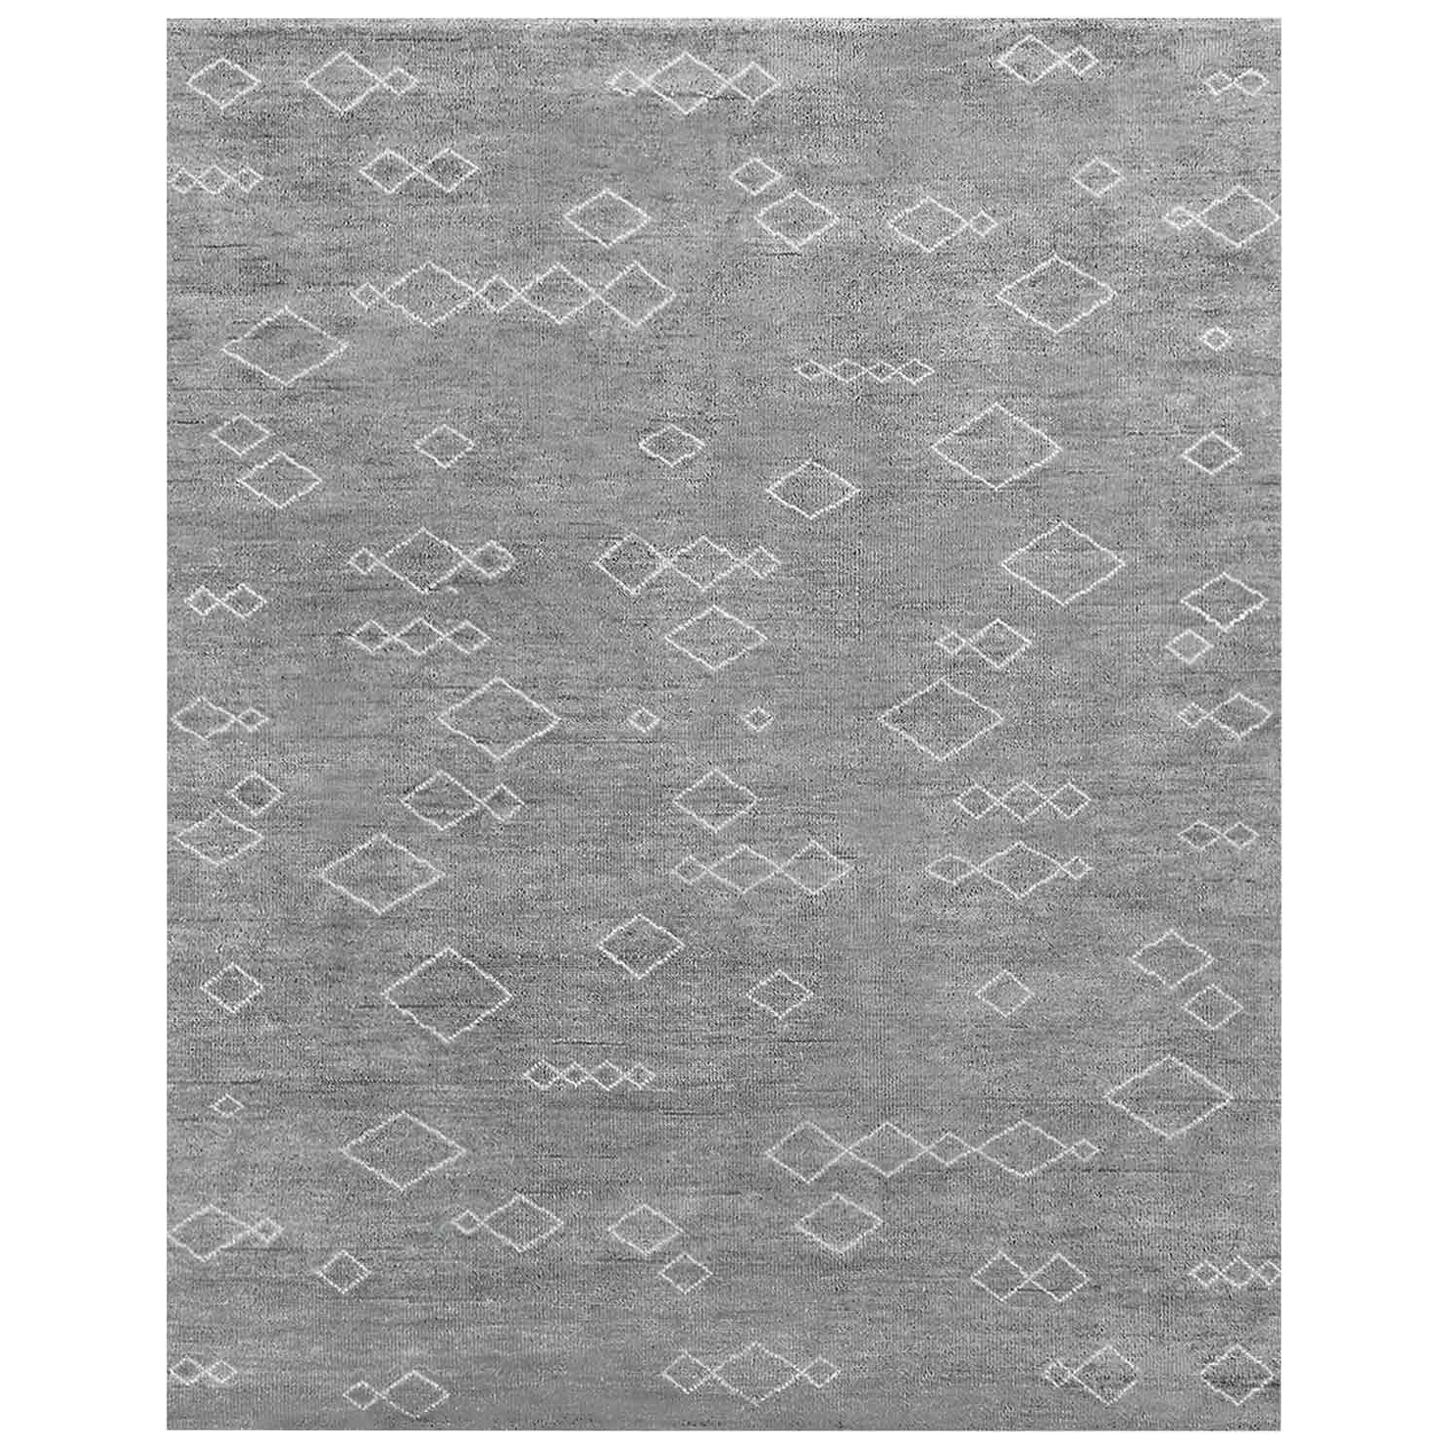 For Sale: Gray (Carbon/Mist) Ben Soleimani Arisa Rug– Moroccan Hand-knotted Plush Wool Carbon/Mist 6'x9'